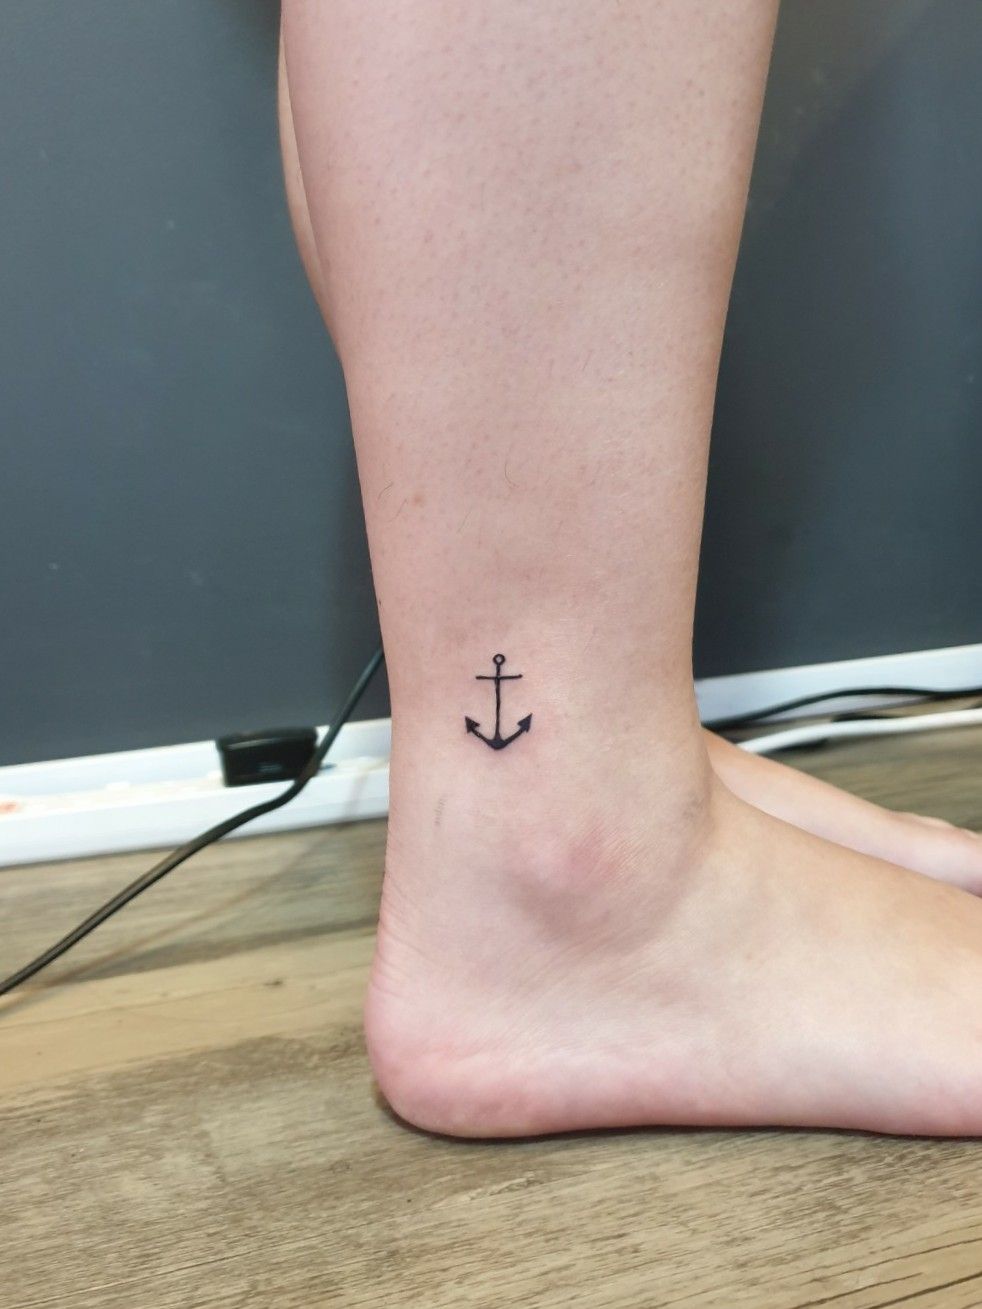 Fuck Yeah, Stick n' Poke! — Just got done with my anchor tattoo. Need to  touch...